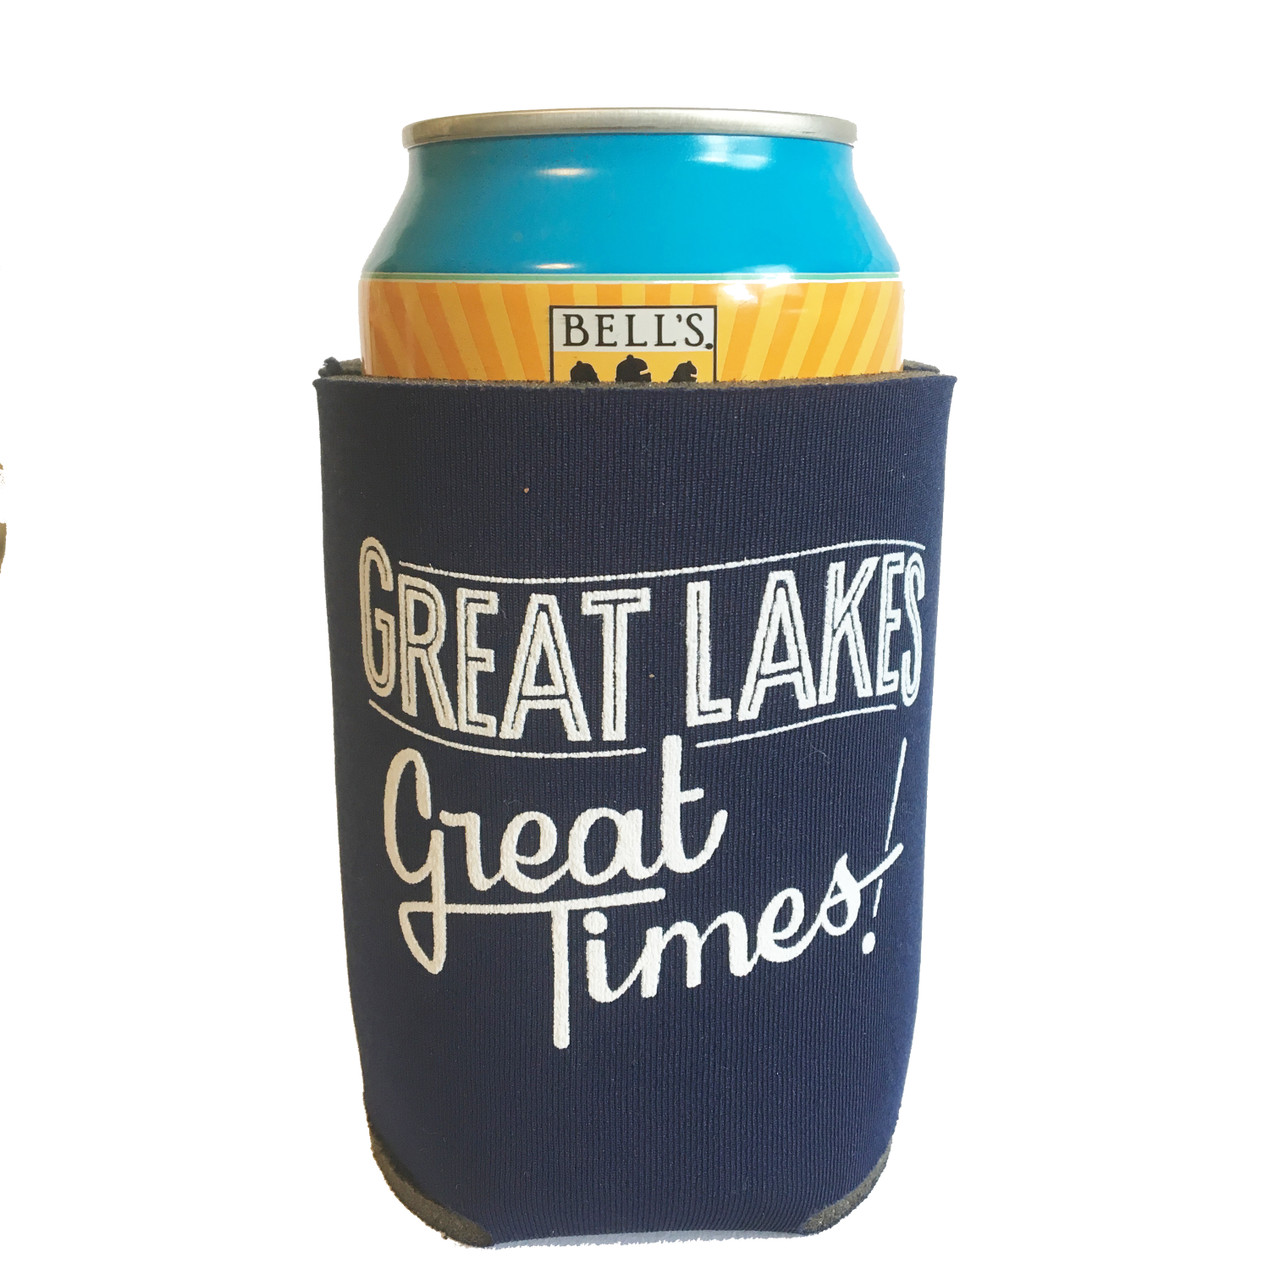 great lakes great times beer koozie, gift for dad, gift for beer lover, city bird